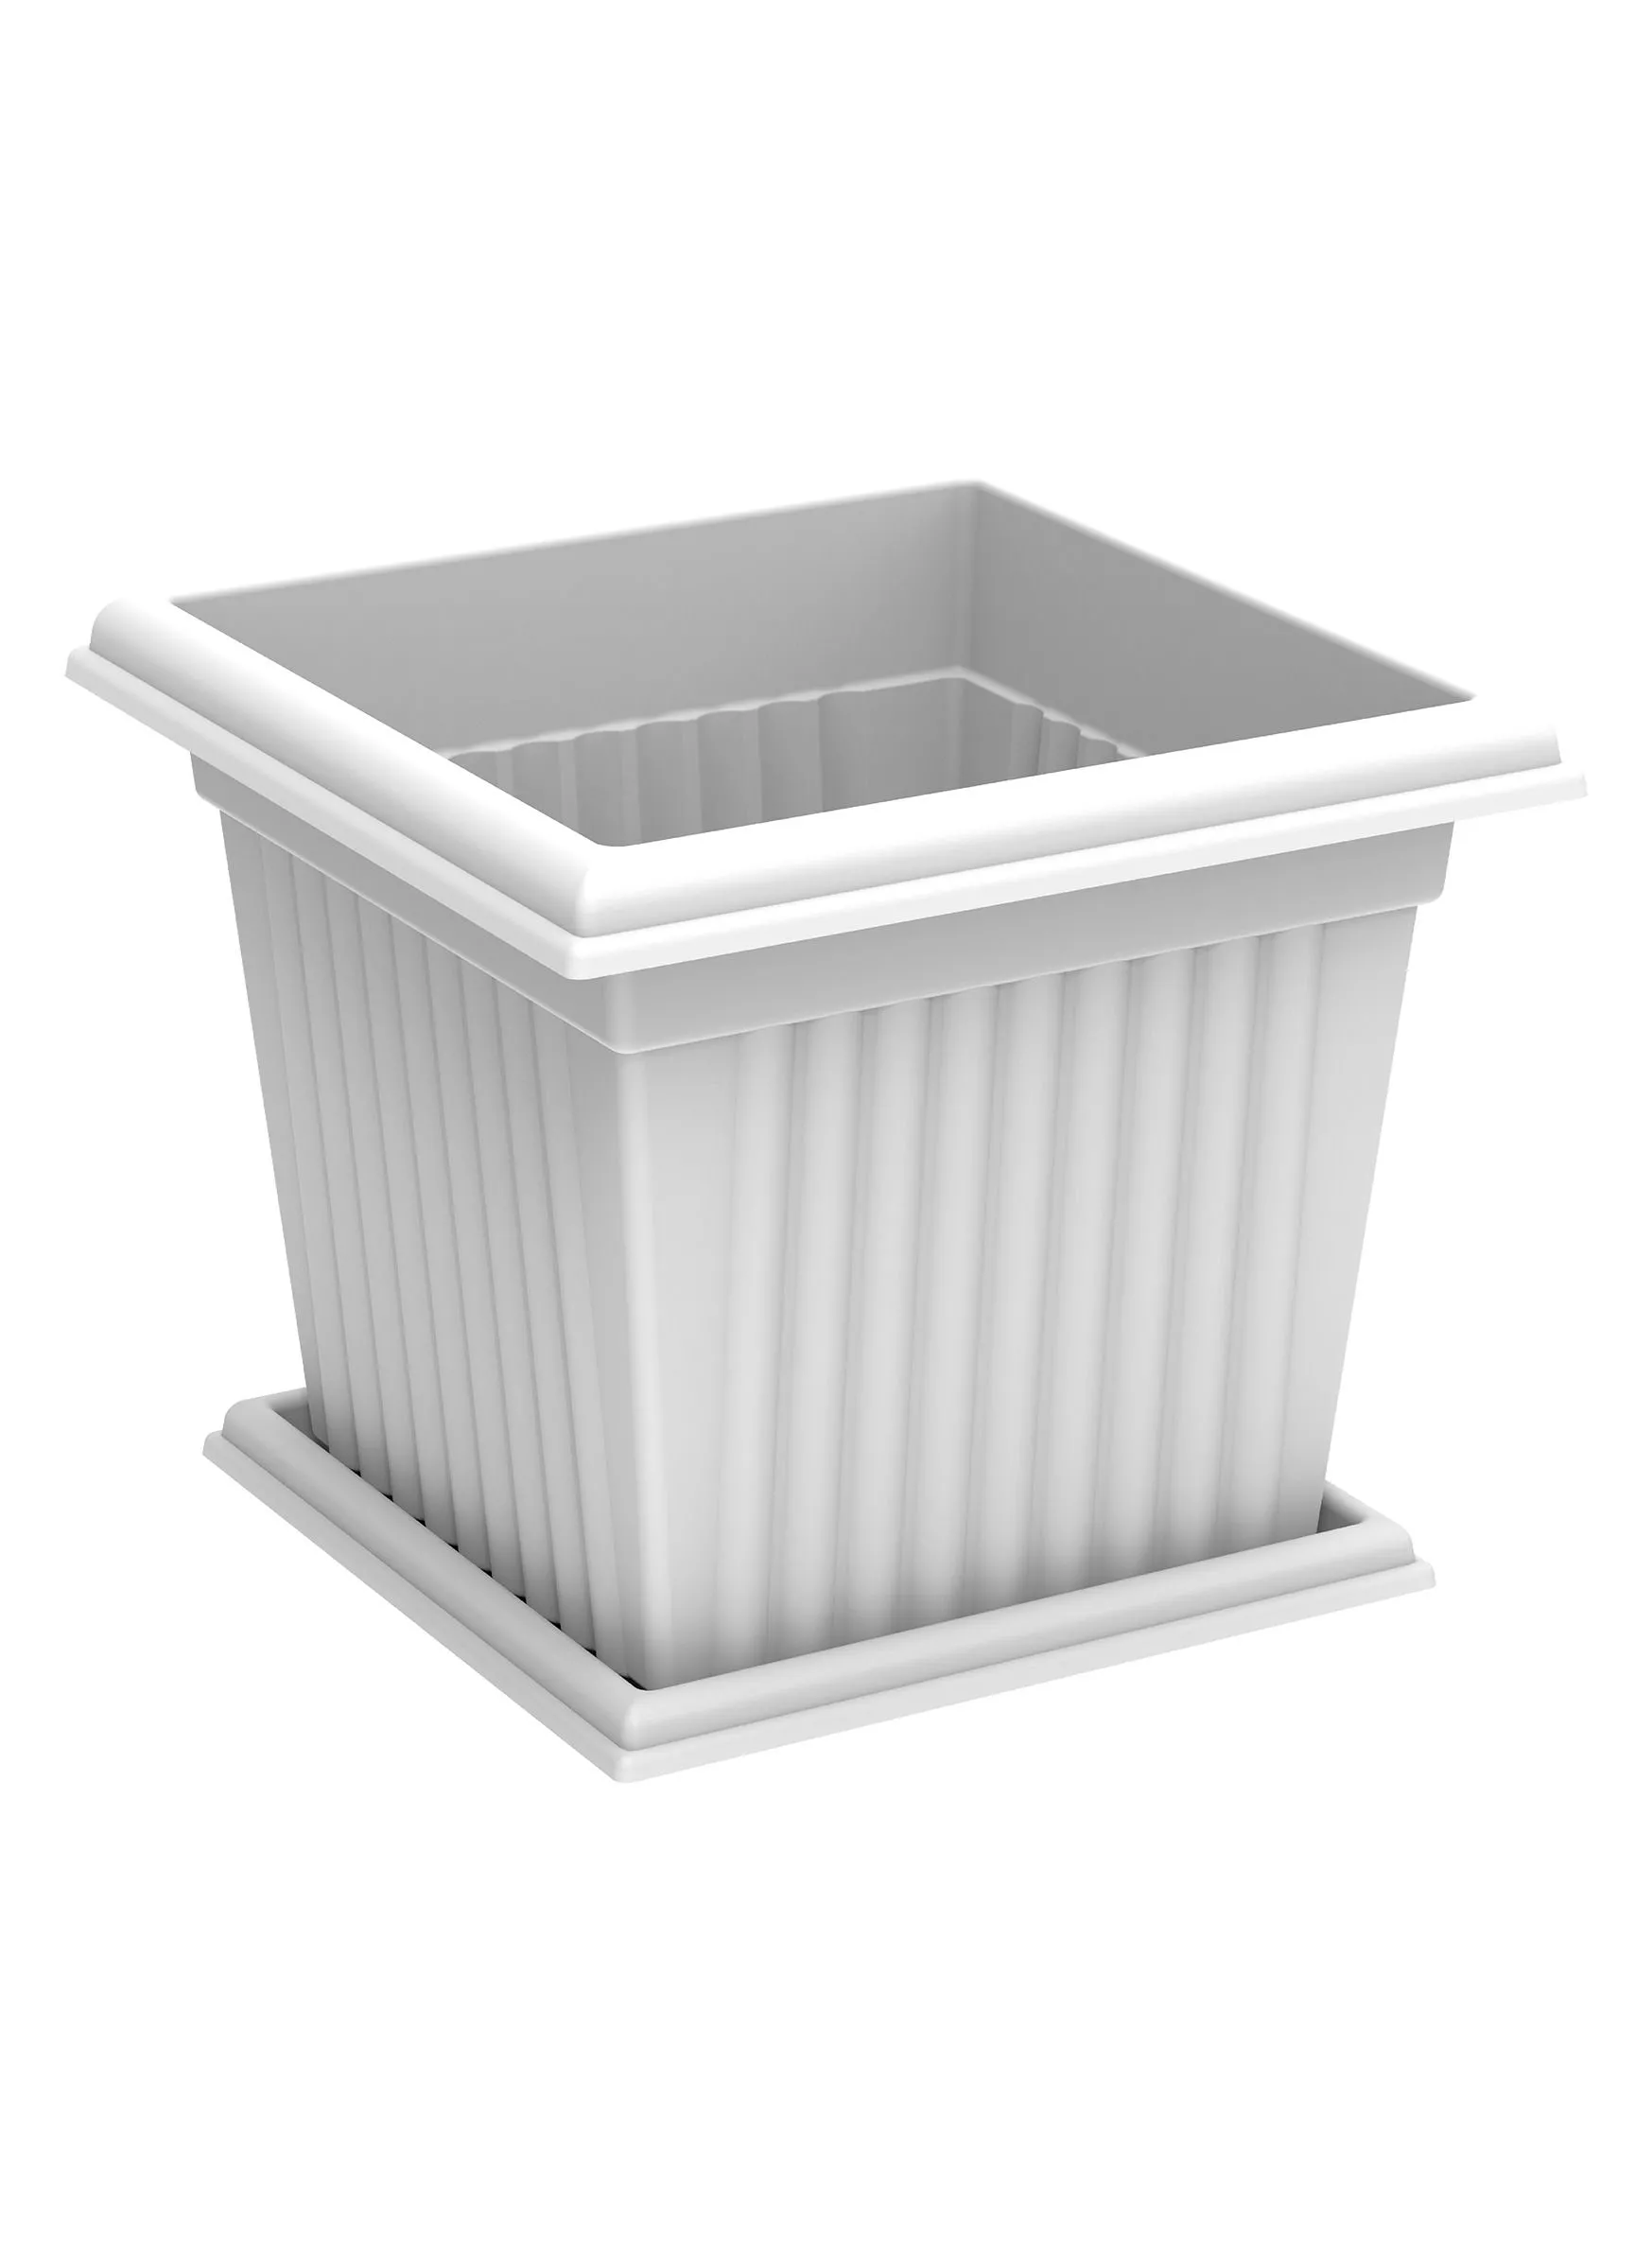 Cosmoplast 10L Square Planter with Tray